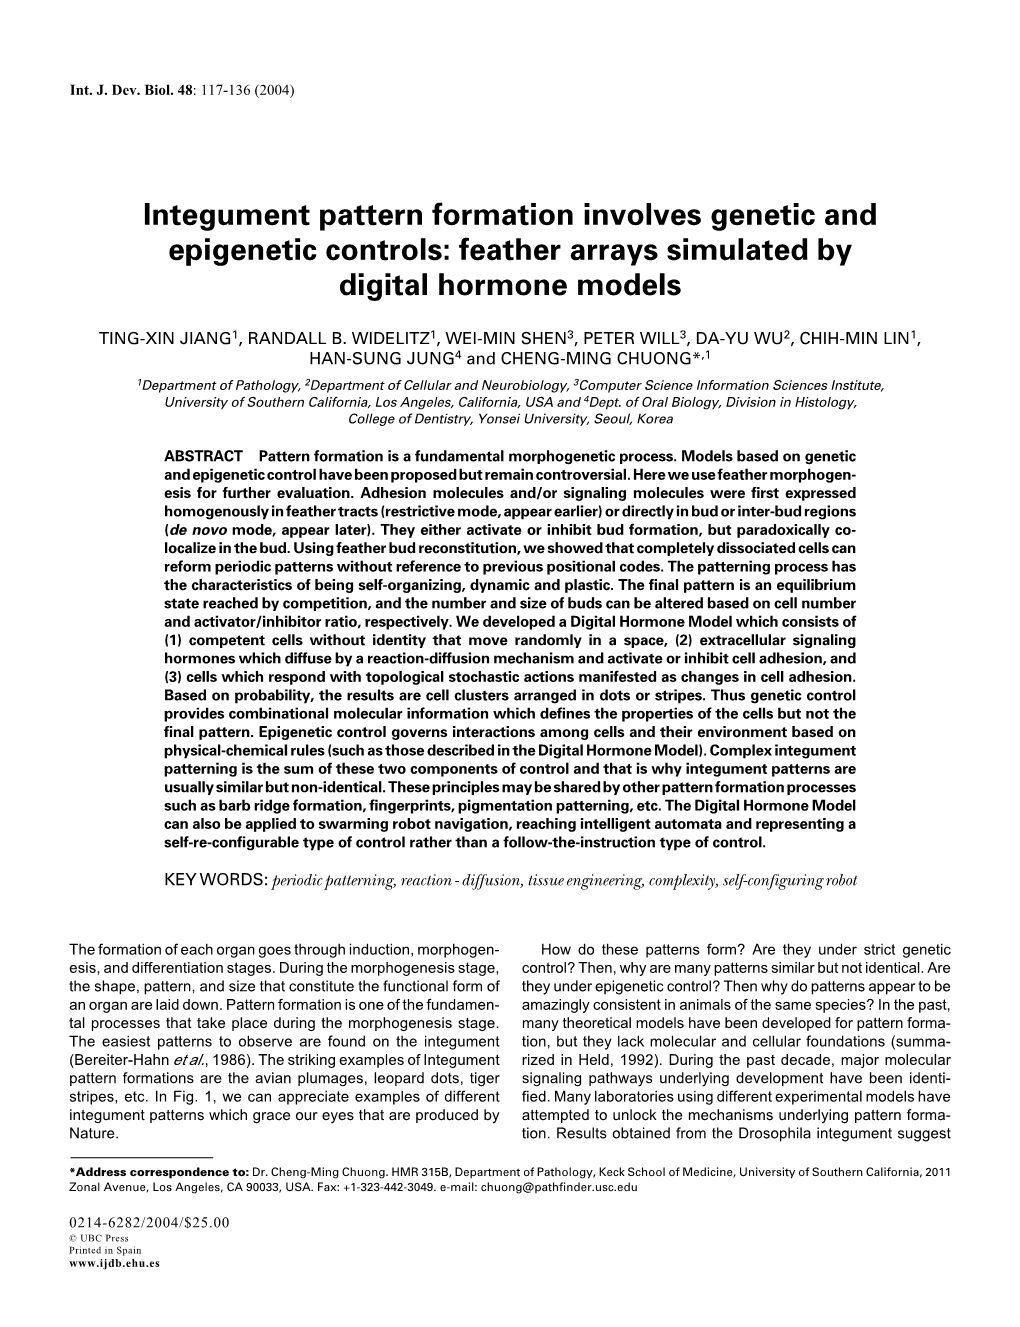 Integument Pattern Formation Involves Genetic and Epigenetic Controls: Feather Arrays Simulated by Digital Hormone Models